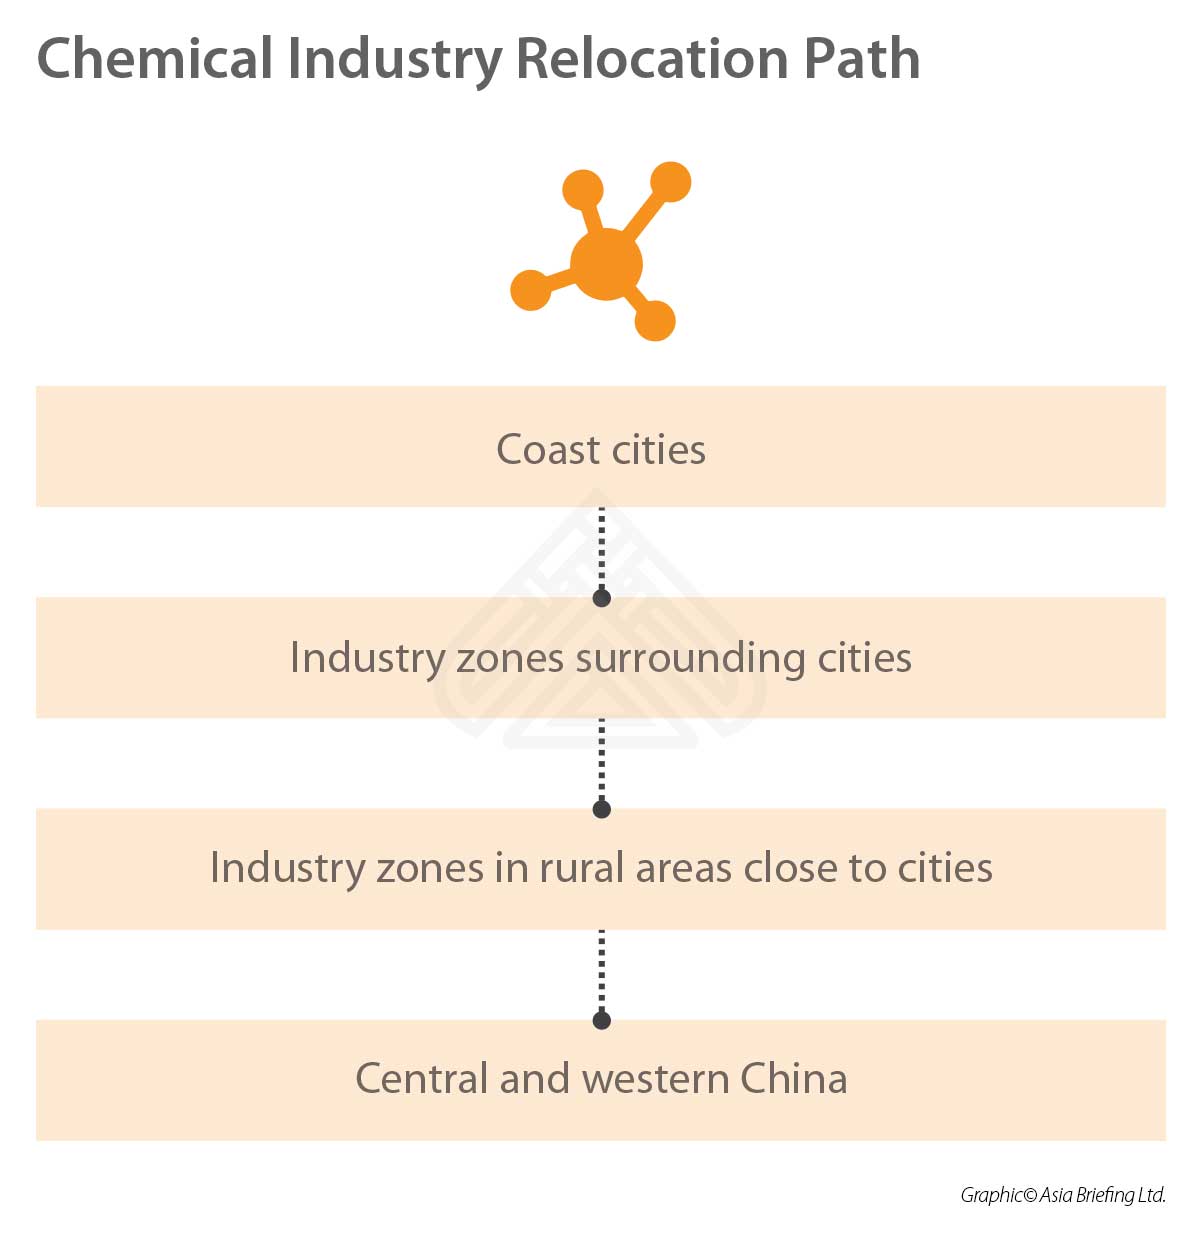 relocating chemical industries in China